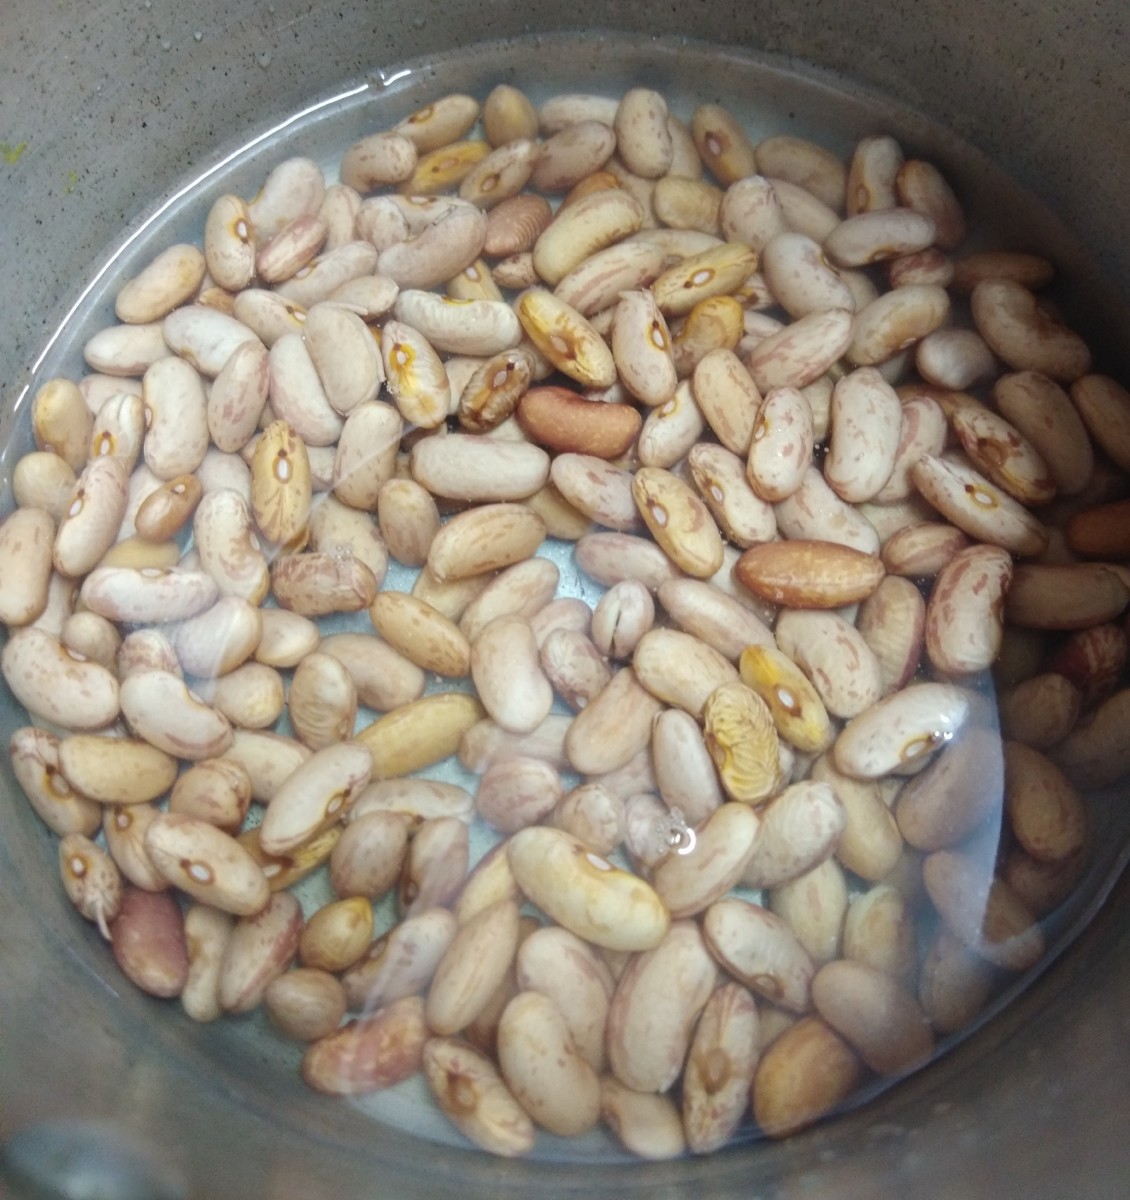 In a pressure cooker, add the kidney beans and water. Add 1/2 teaspoon of salt. Close the lid.